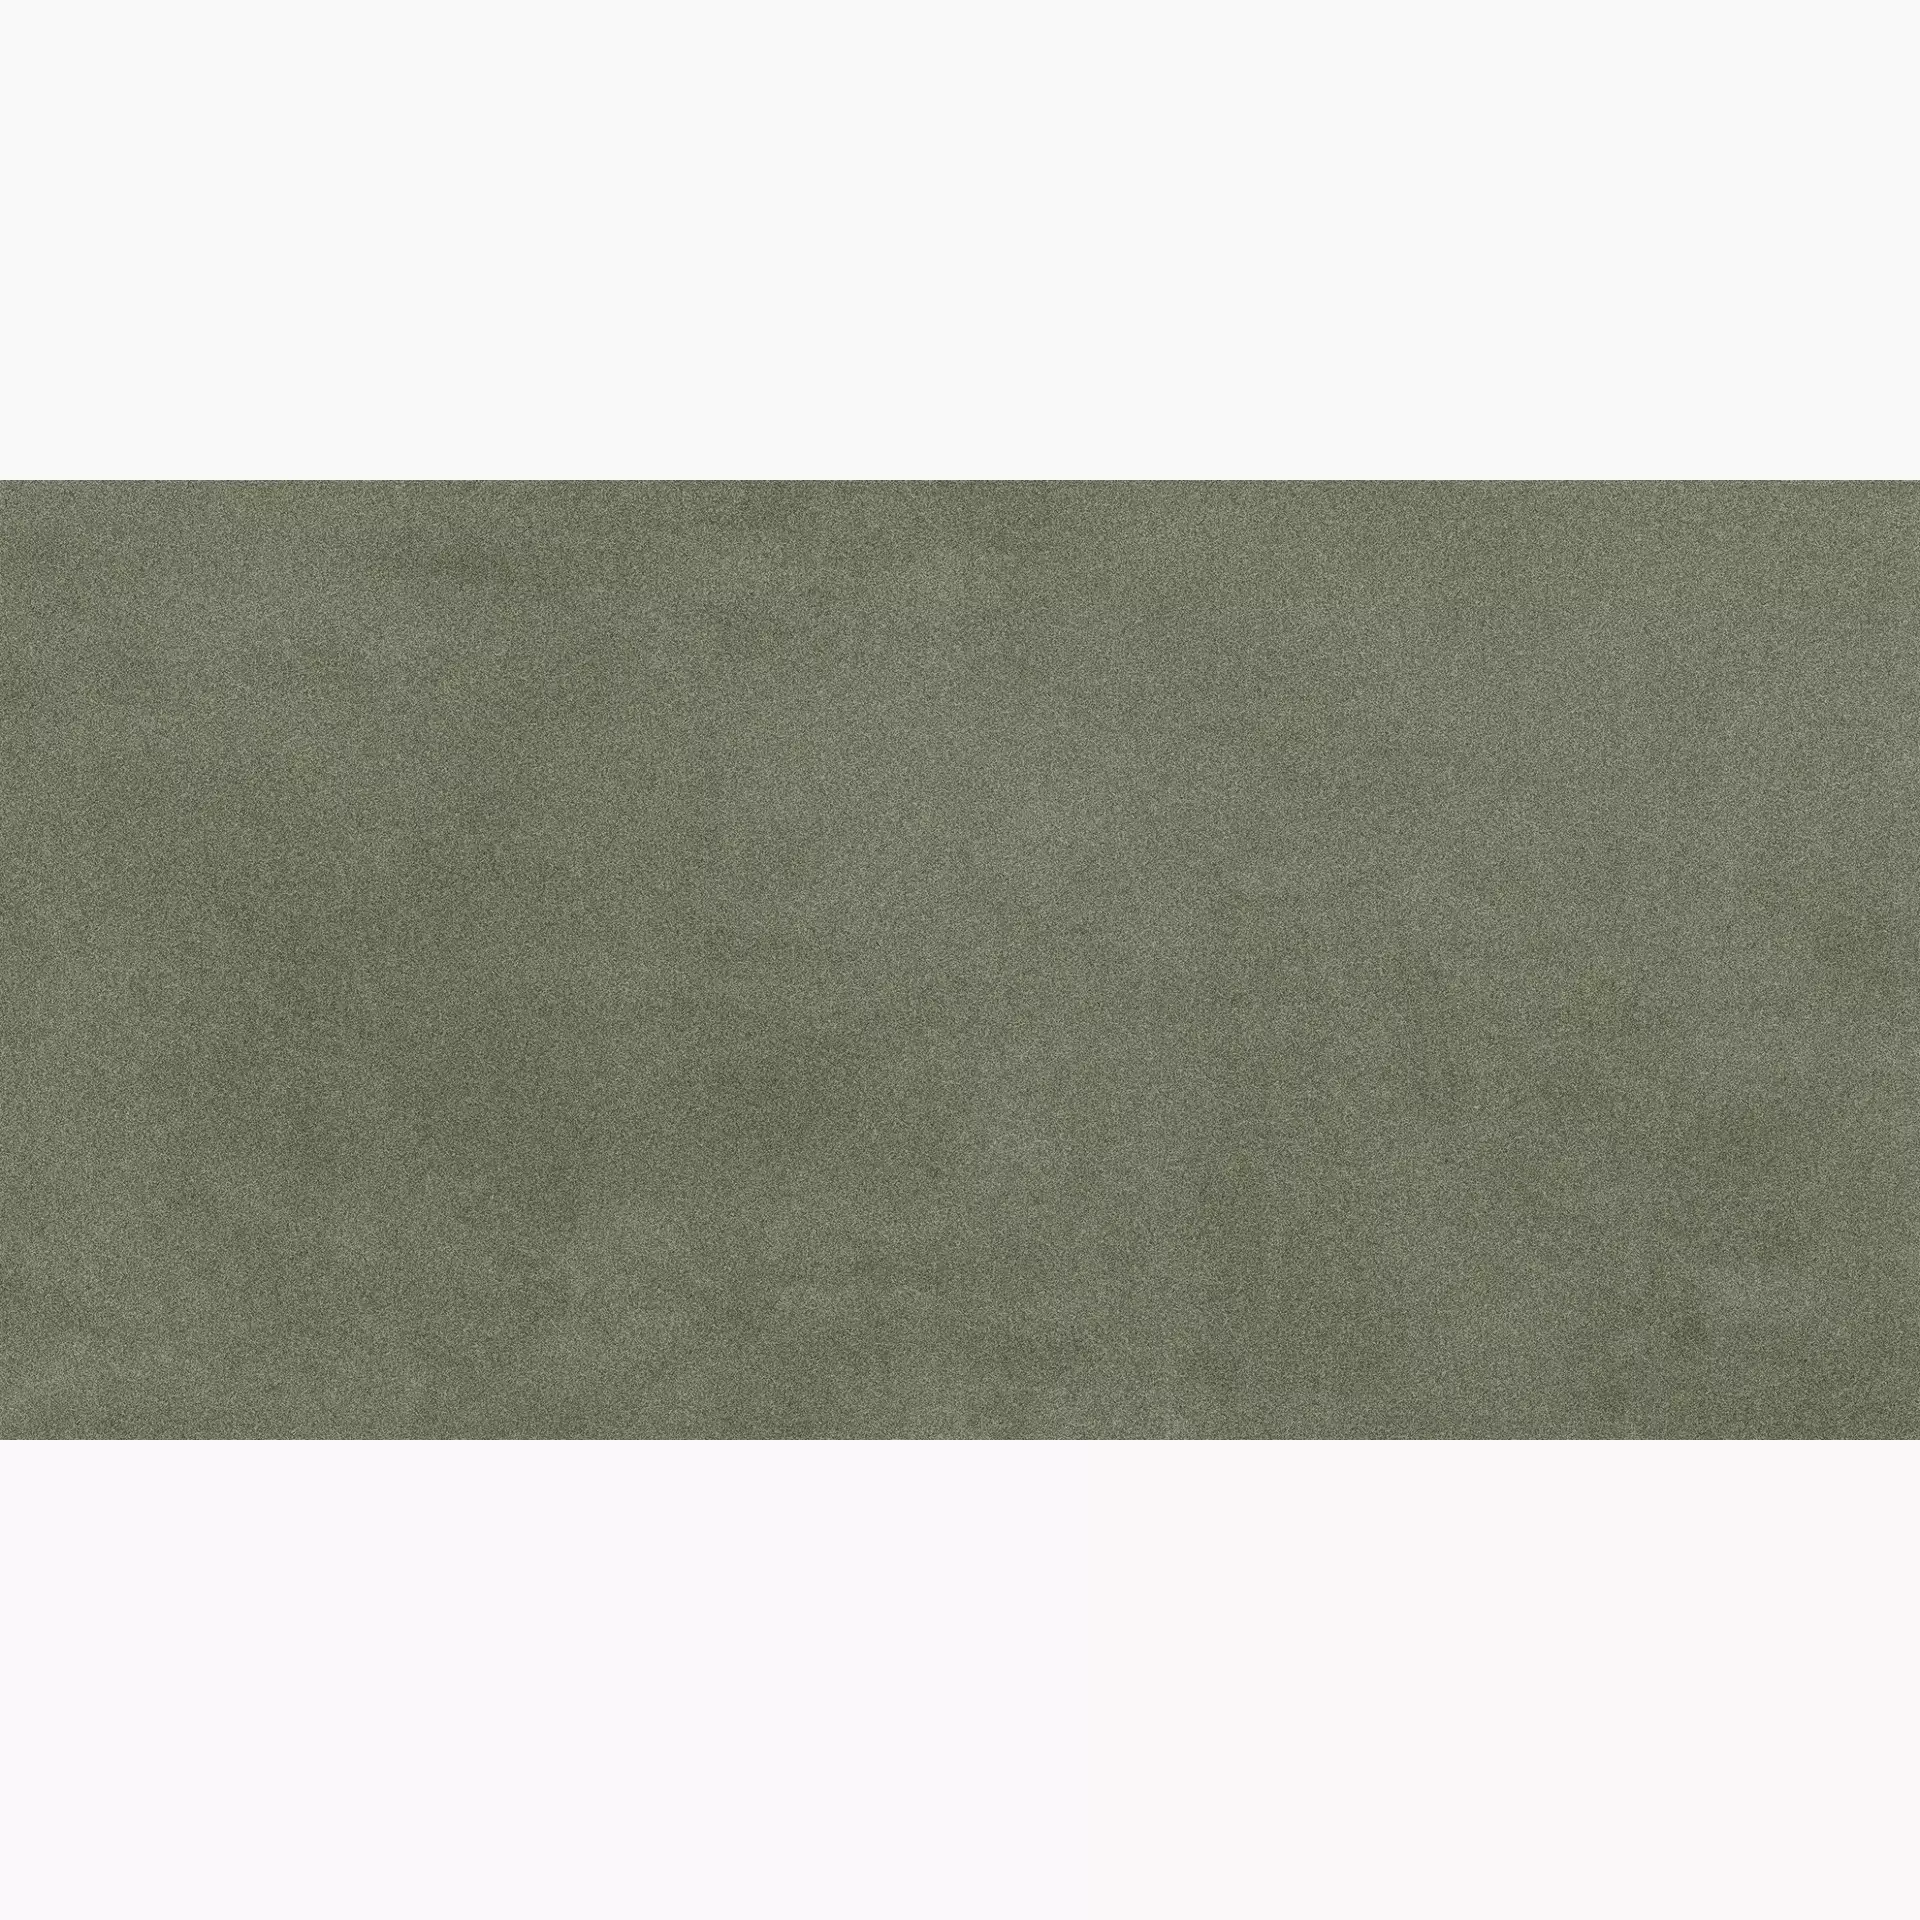 Atlasconcorde Boost Pro Taupe Outdoor A4XW 60x120cm rectified 20mm